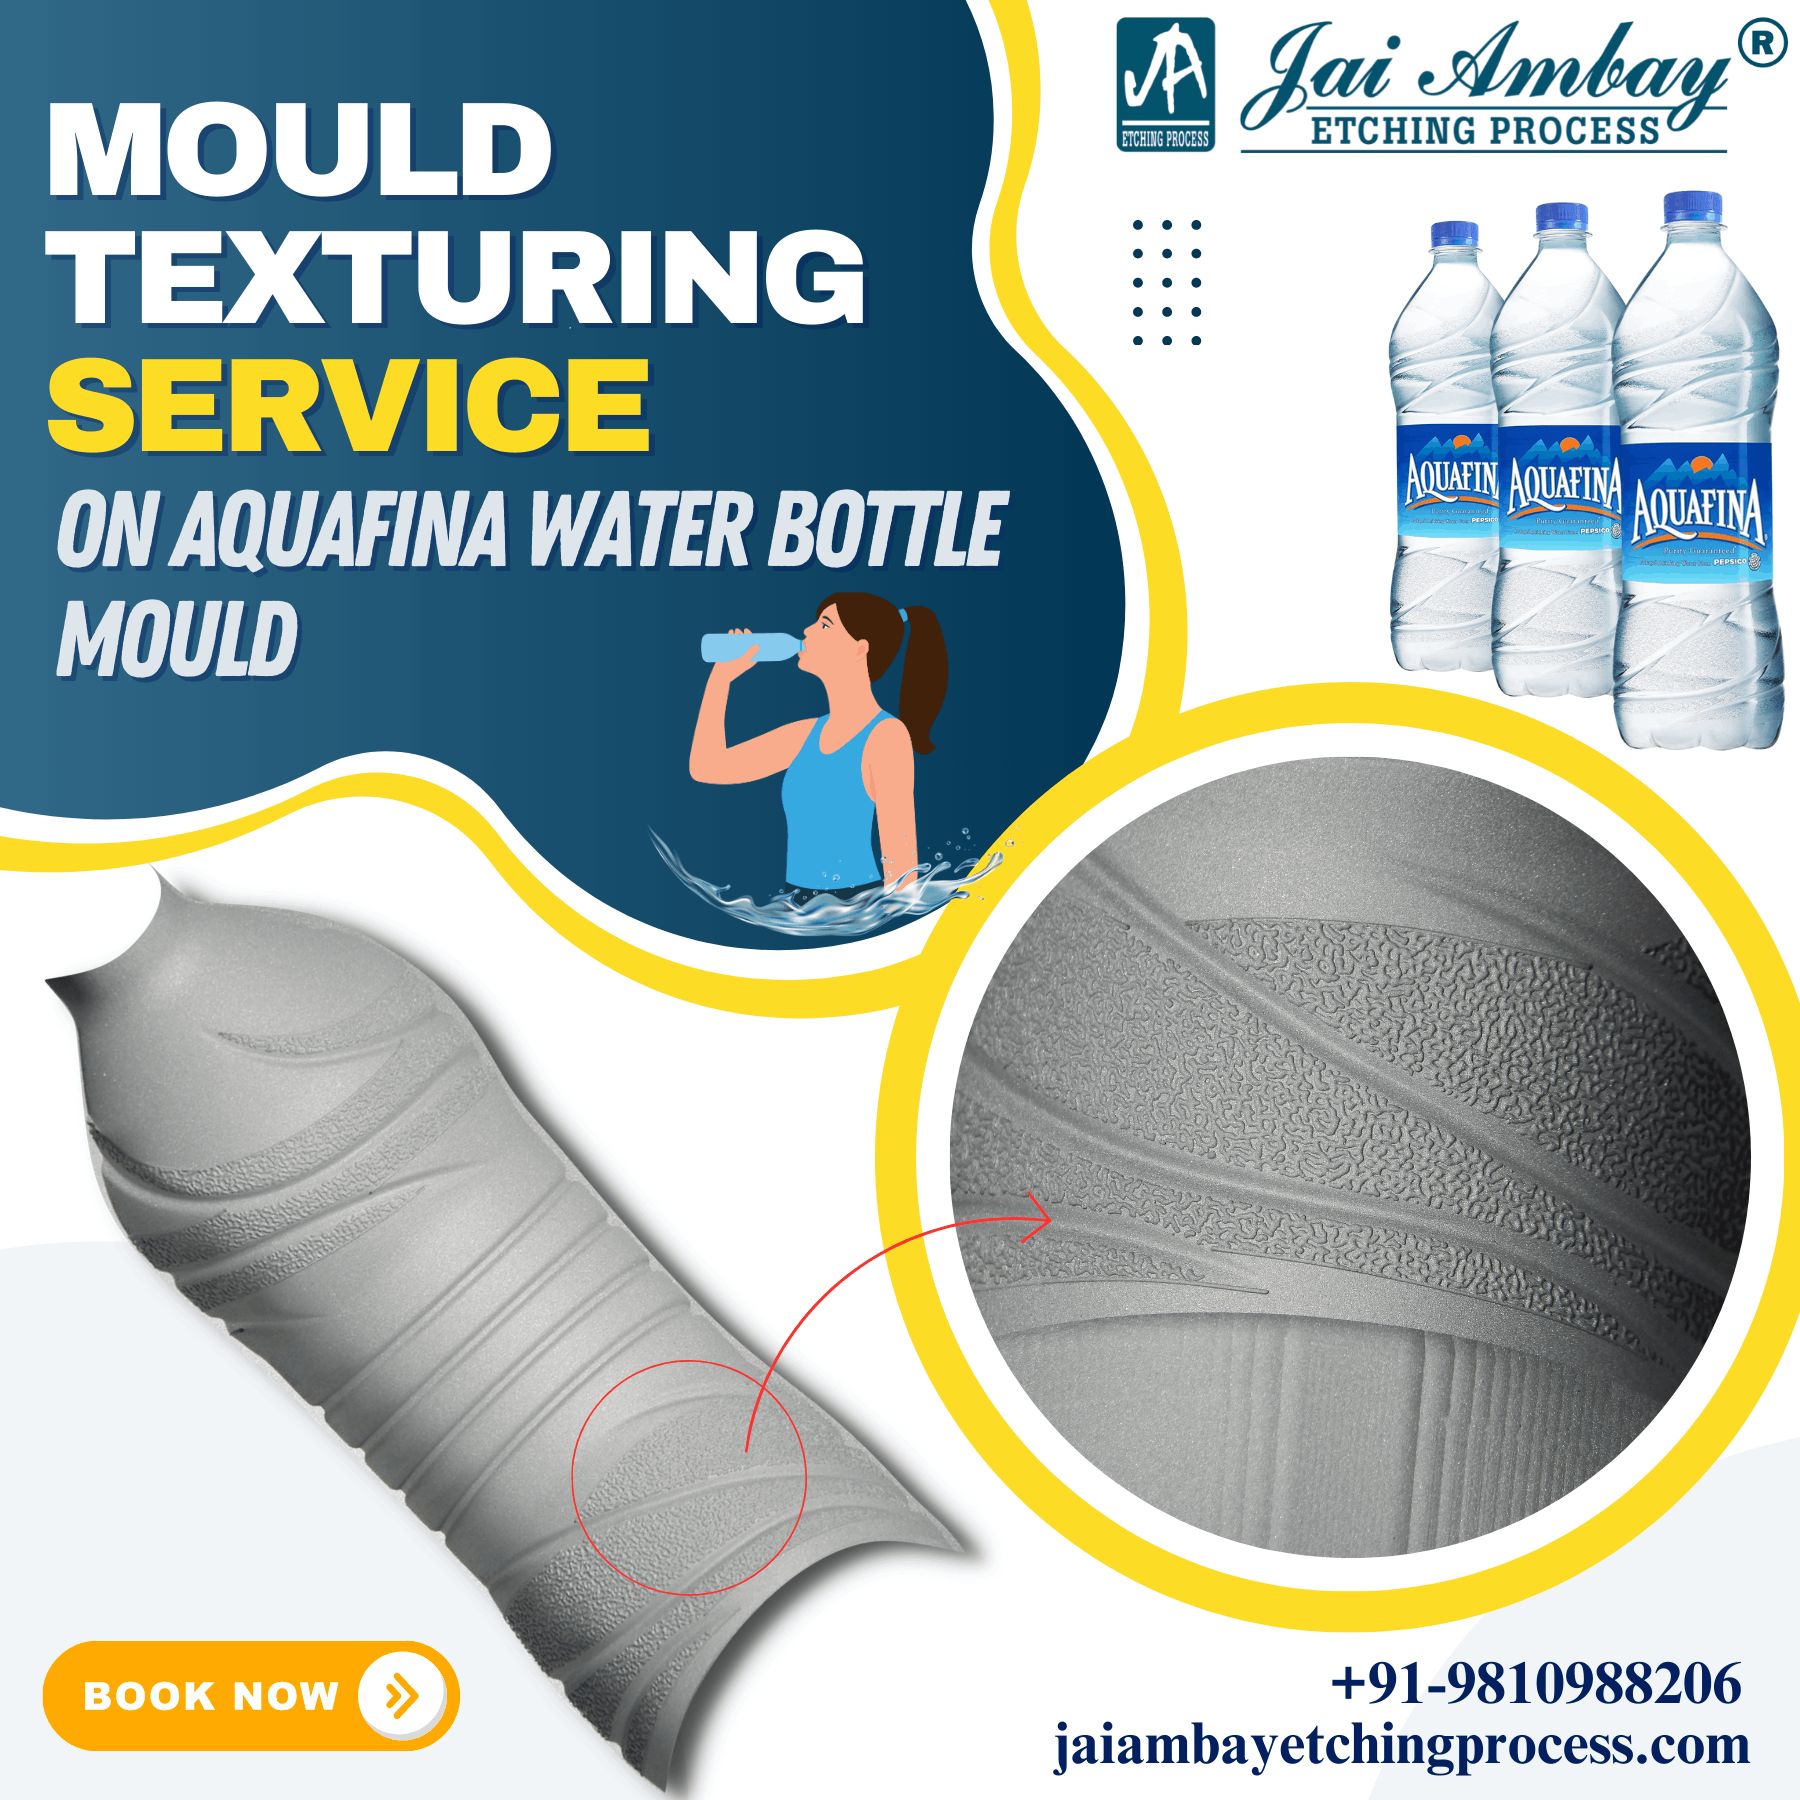 Mould Texturing Services on Aquafina Bottle Mould by Jai Ambay Etching Process